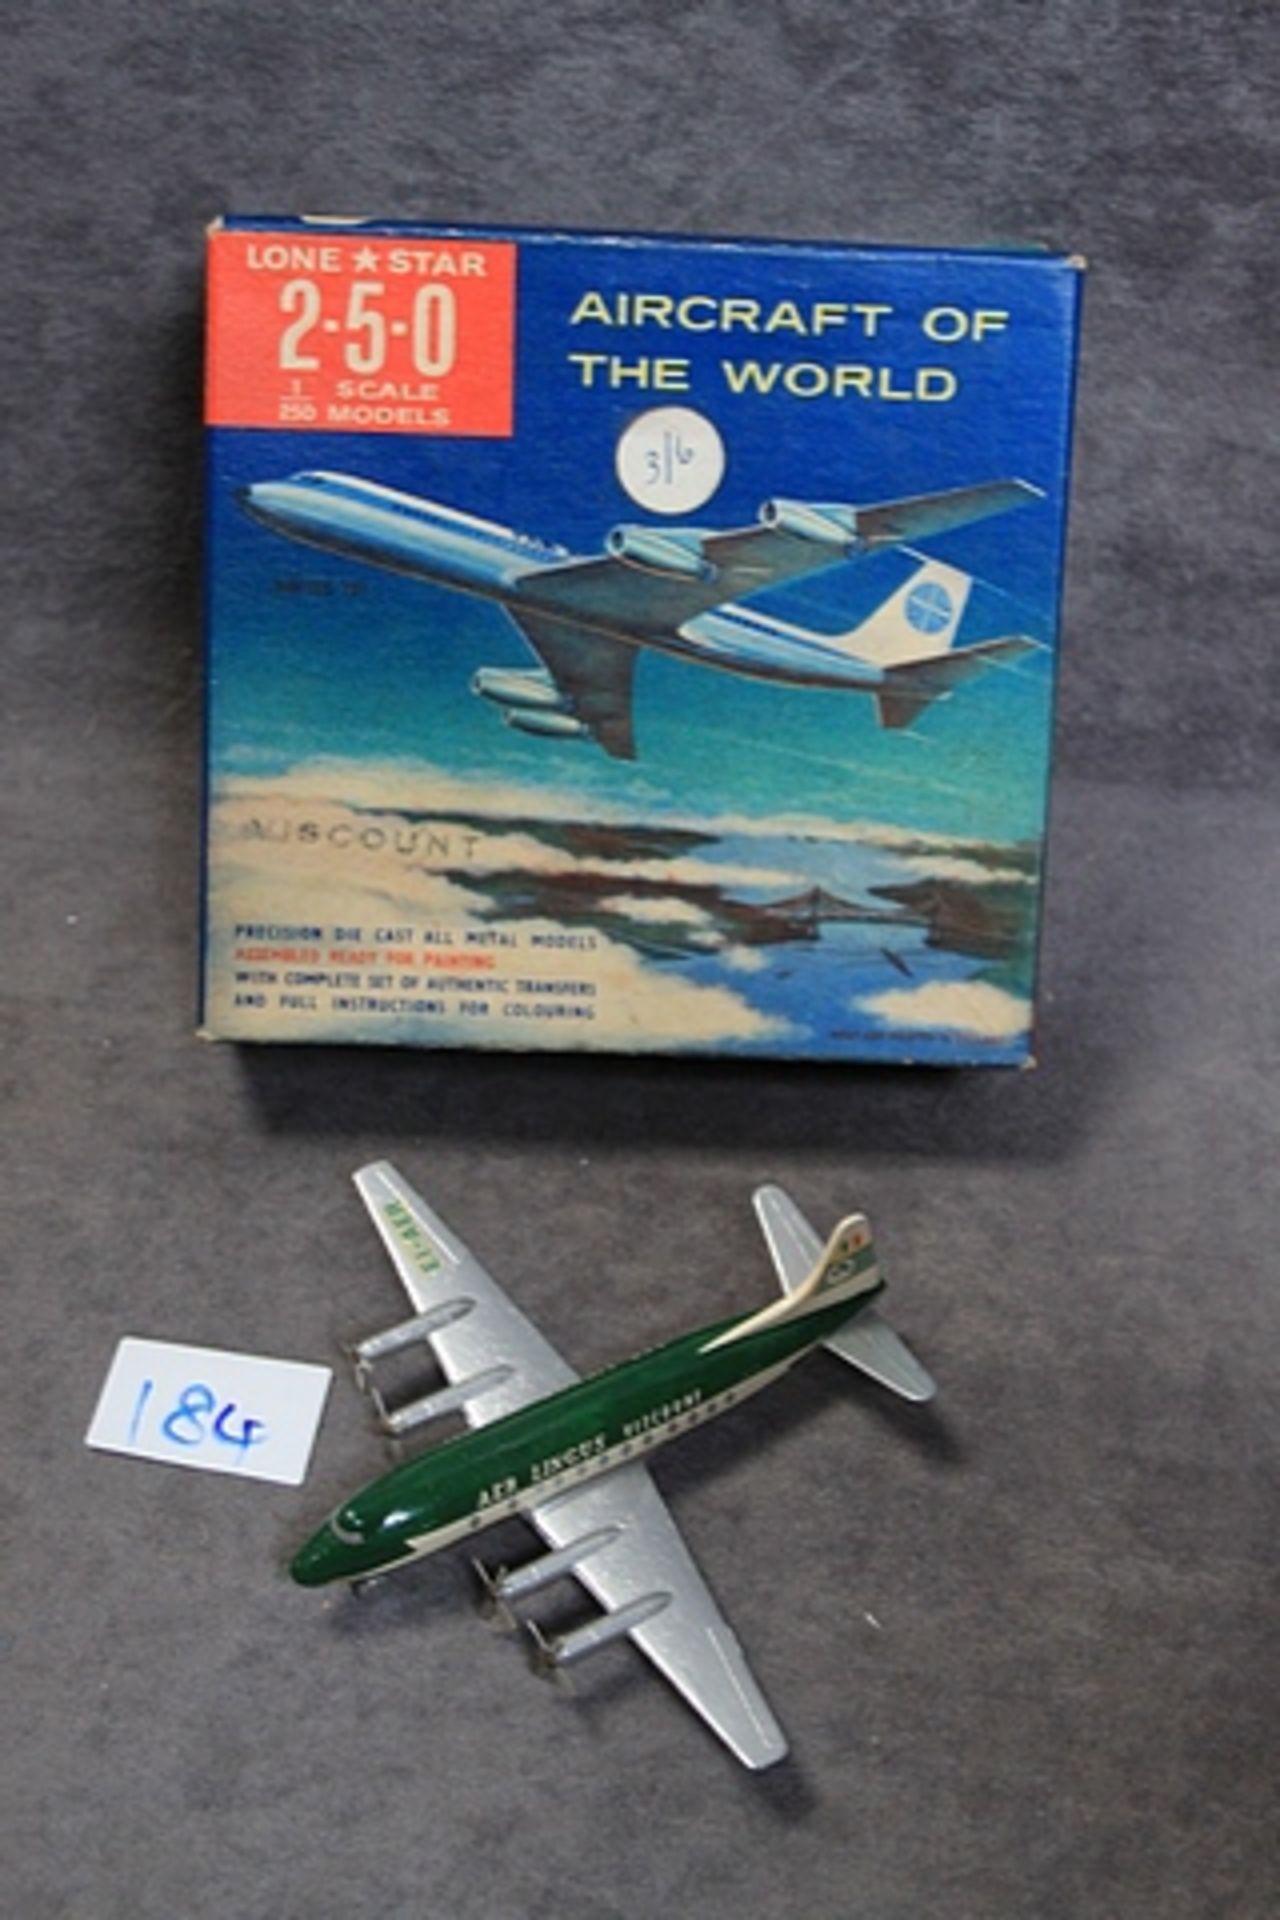 Lone Star Aircraft of the World 1/250th scale Diecast Aer Lingus Decal Plane